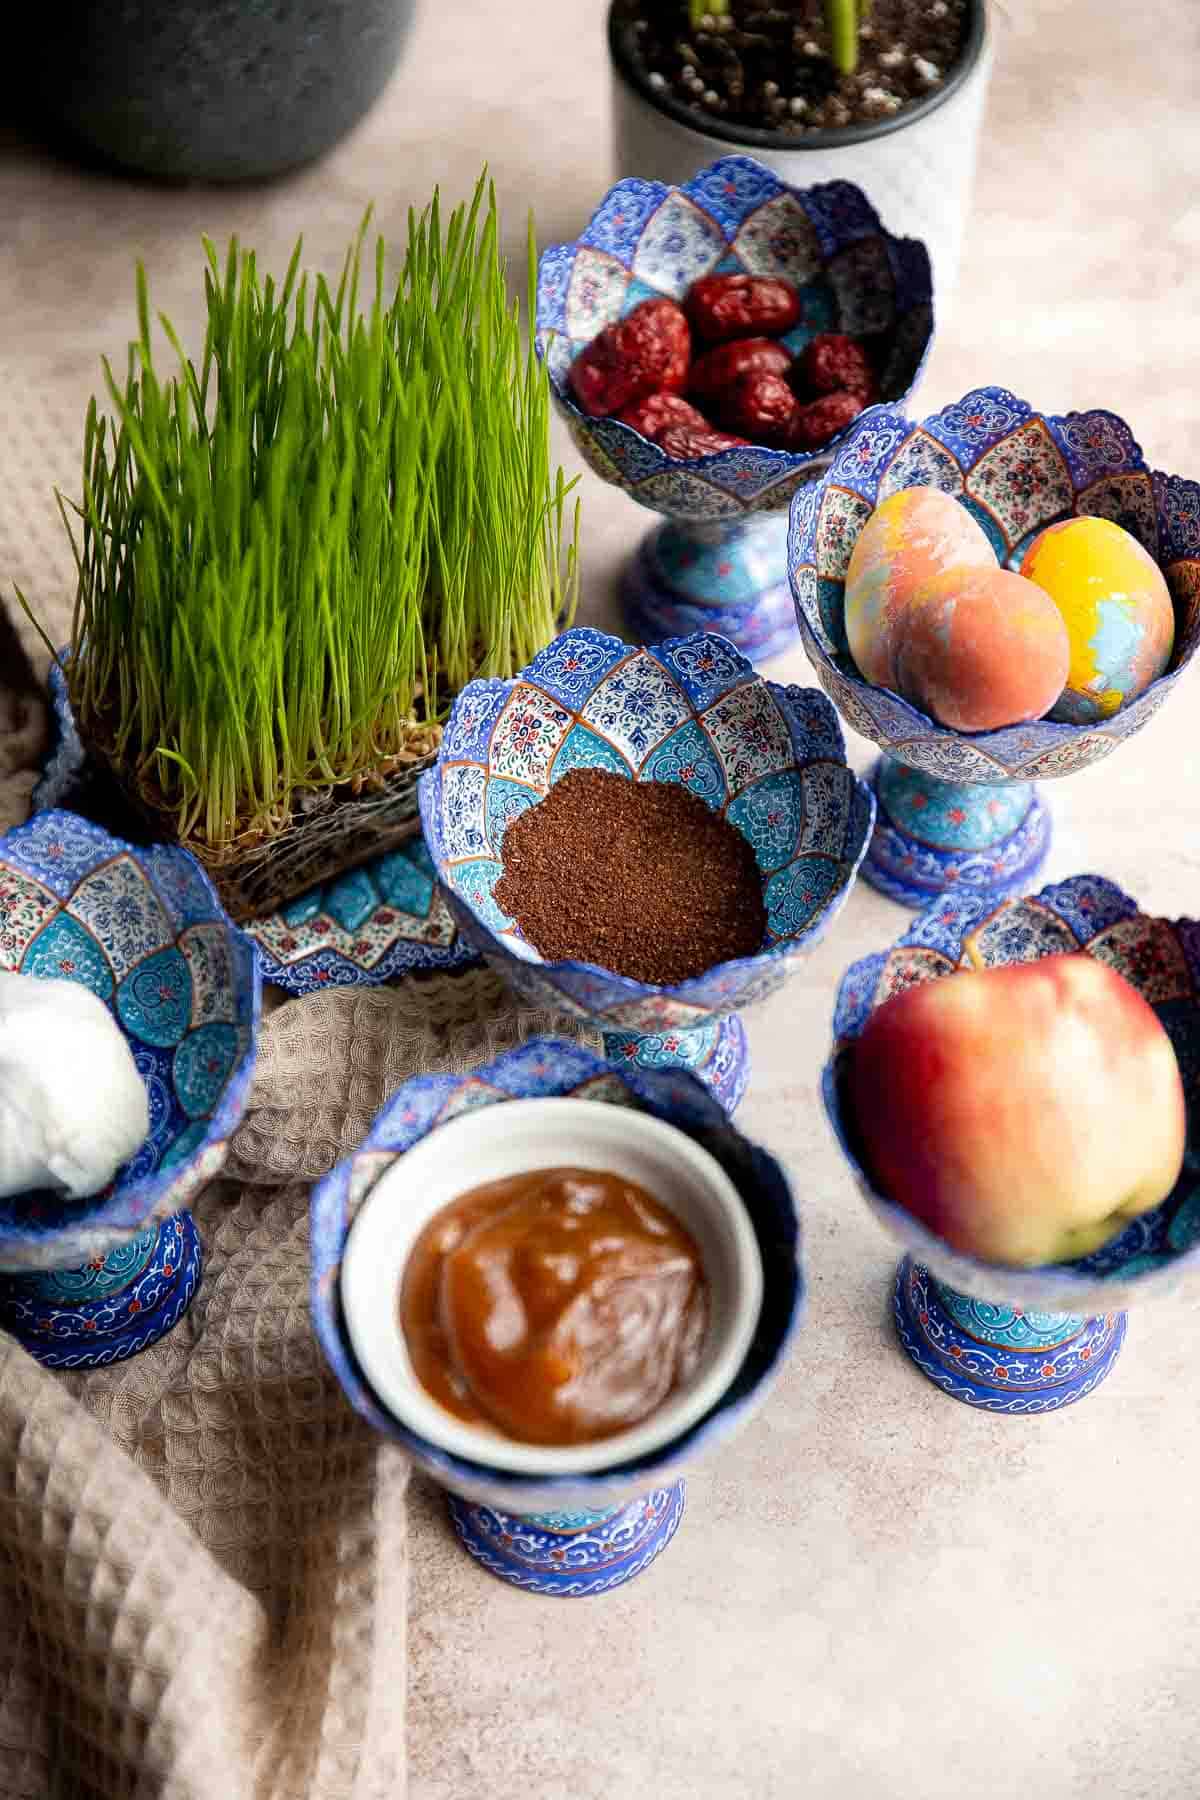 haft-sin-table-for-norouz-persian-new-year-ahead-of-thyme